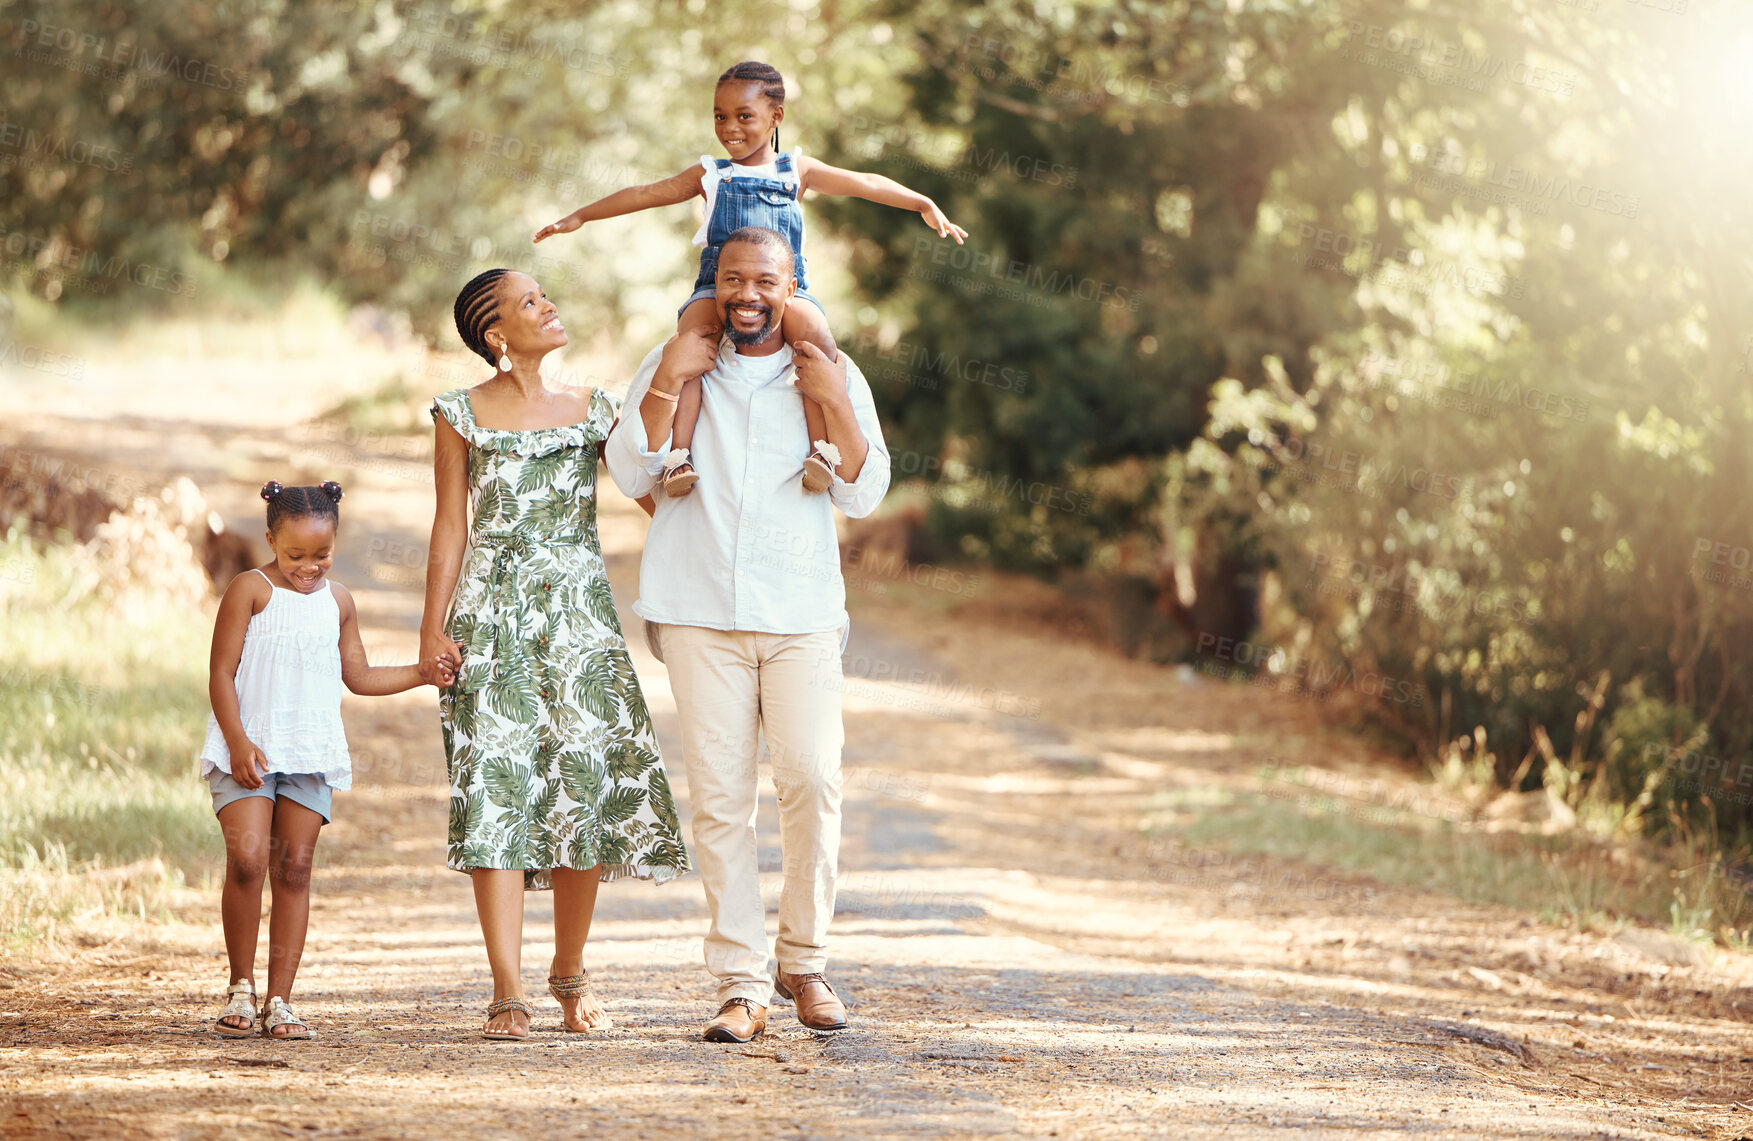 Buy stock photo Happy black family bonding on an outdoor work in a park, loving and having fun together. African American parents enjoying fresh air and an active walk with their children, playful, cheerful and free